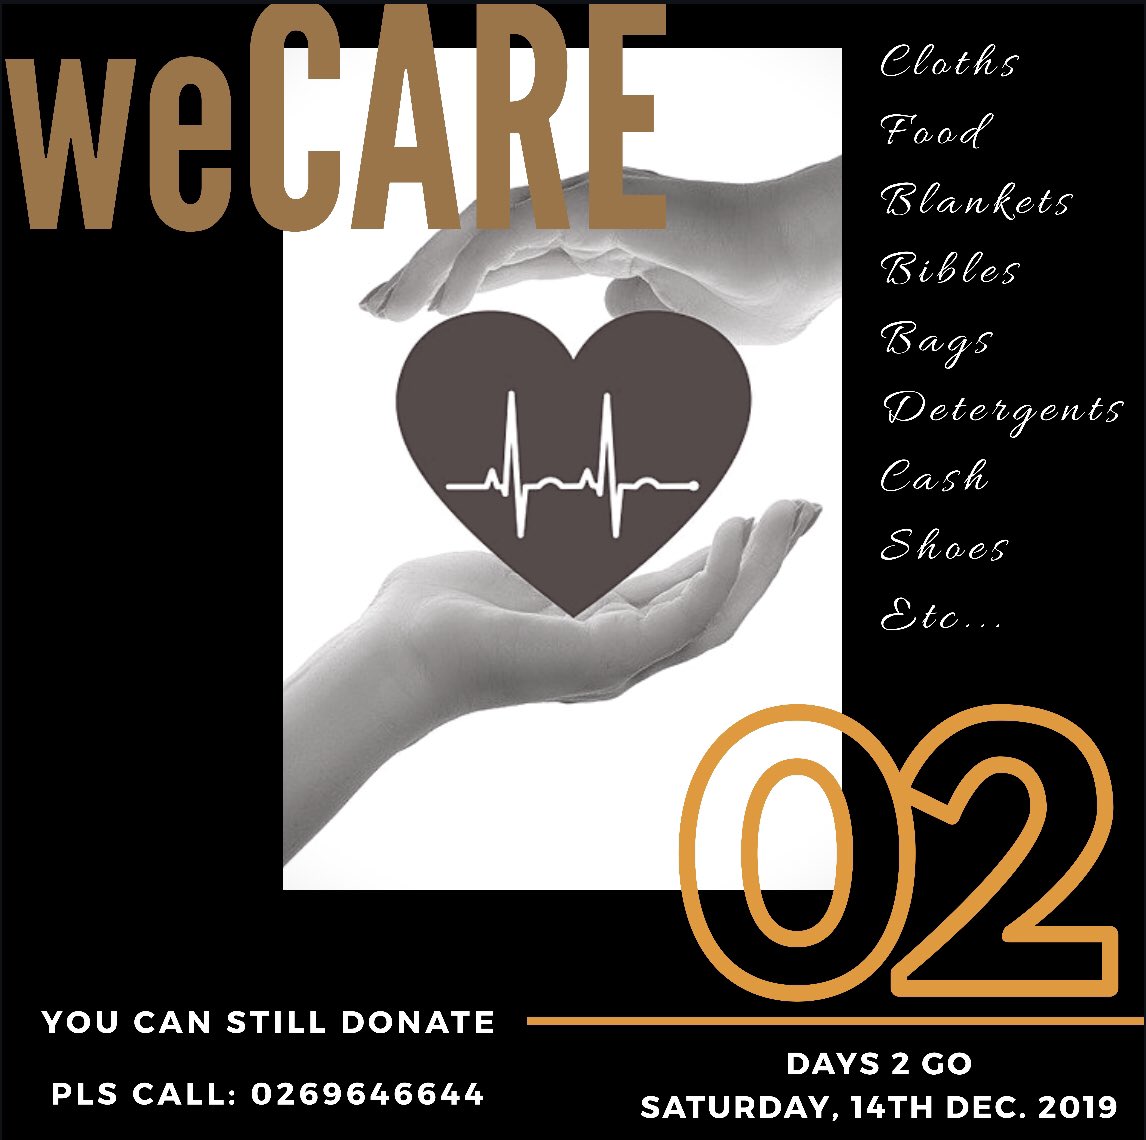 #weCARE is 2 days away.

Be a vessel of #Hope for someone.

#TMH
#SupernaturalArena
#Purpose2020